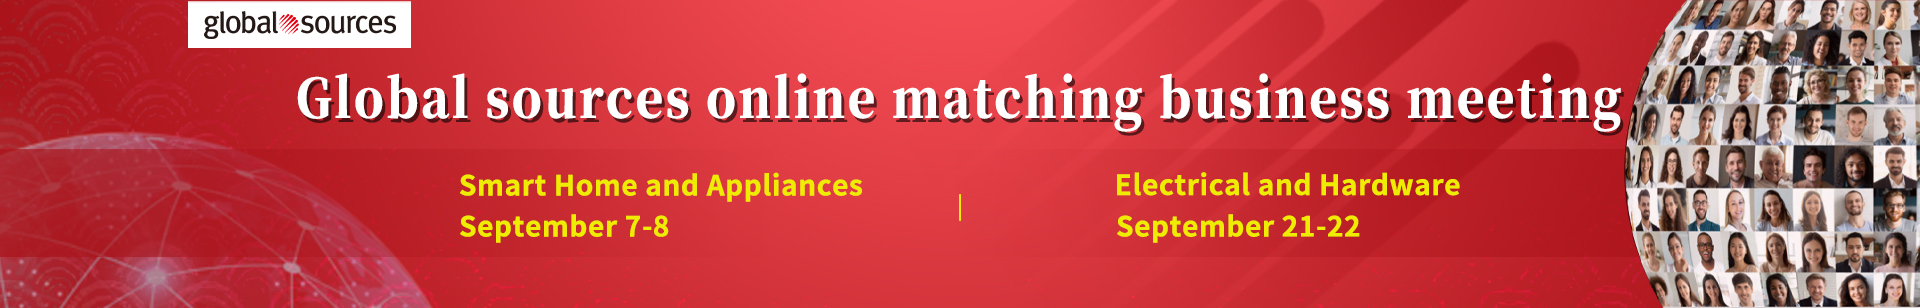 Global sources online matching business meeting